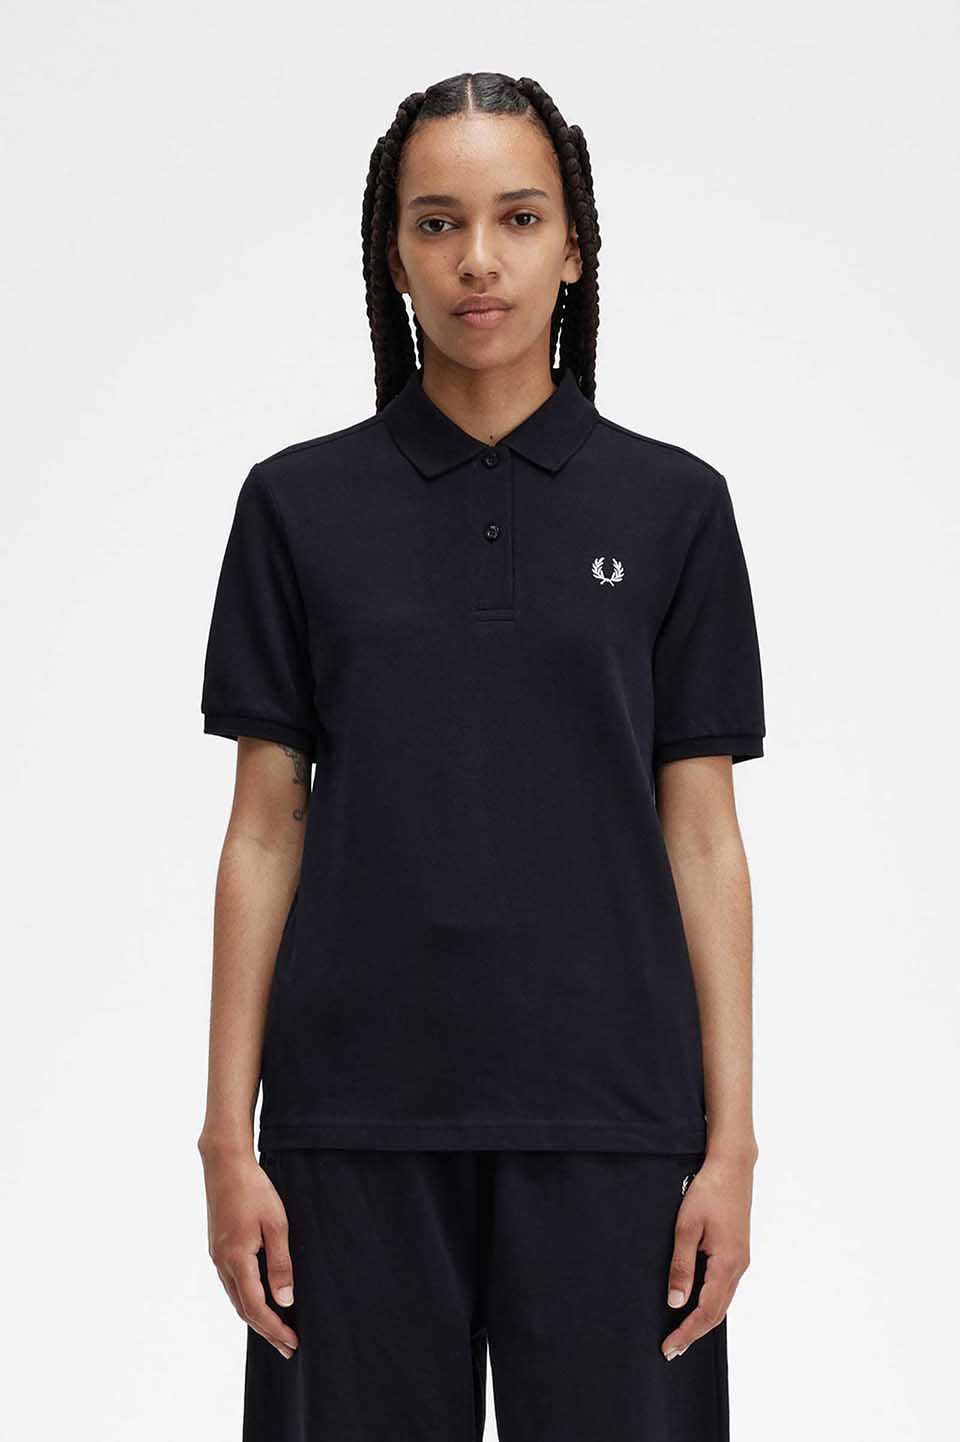 The Fred Perry Shirt - G6000(8 102：BLACK): | FRED PERRY JAPAN | フレッドペリー ...